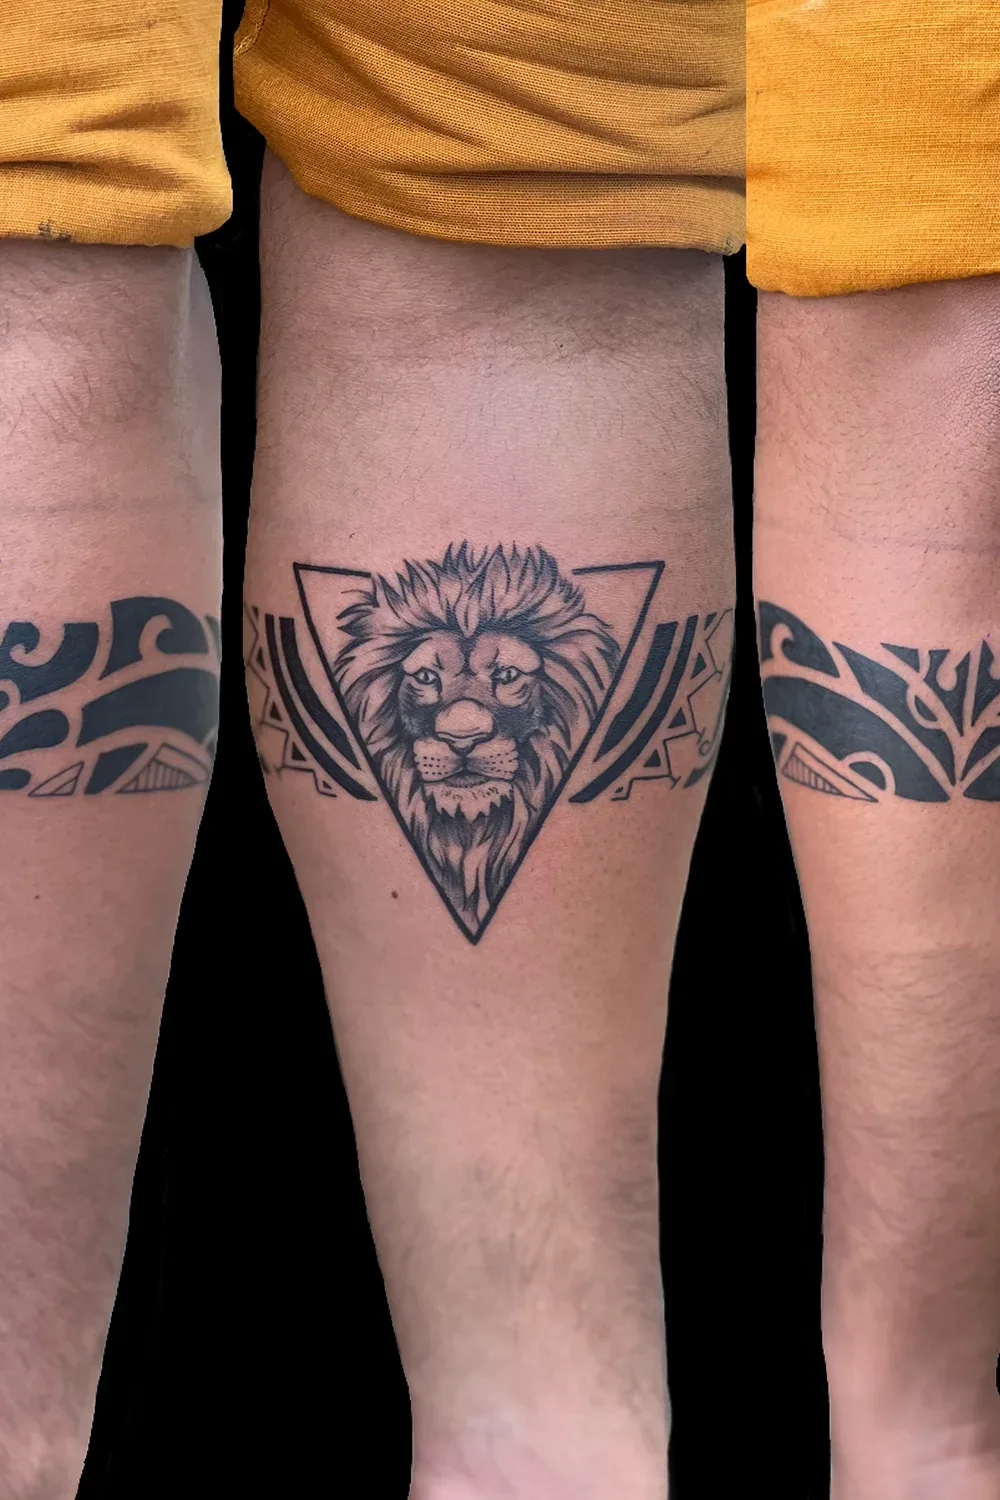 Lion Band tattoo, For Parlour at Rs 499/inch in Bengaluru | ID: 21986870230